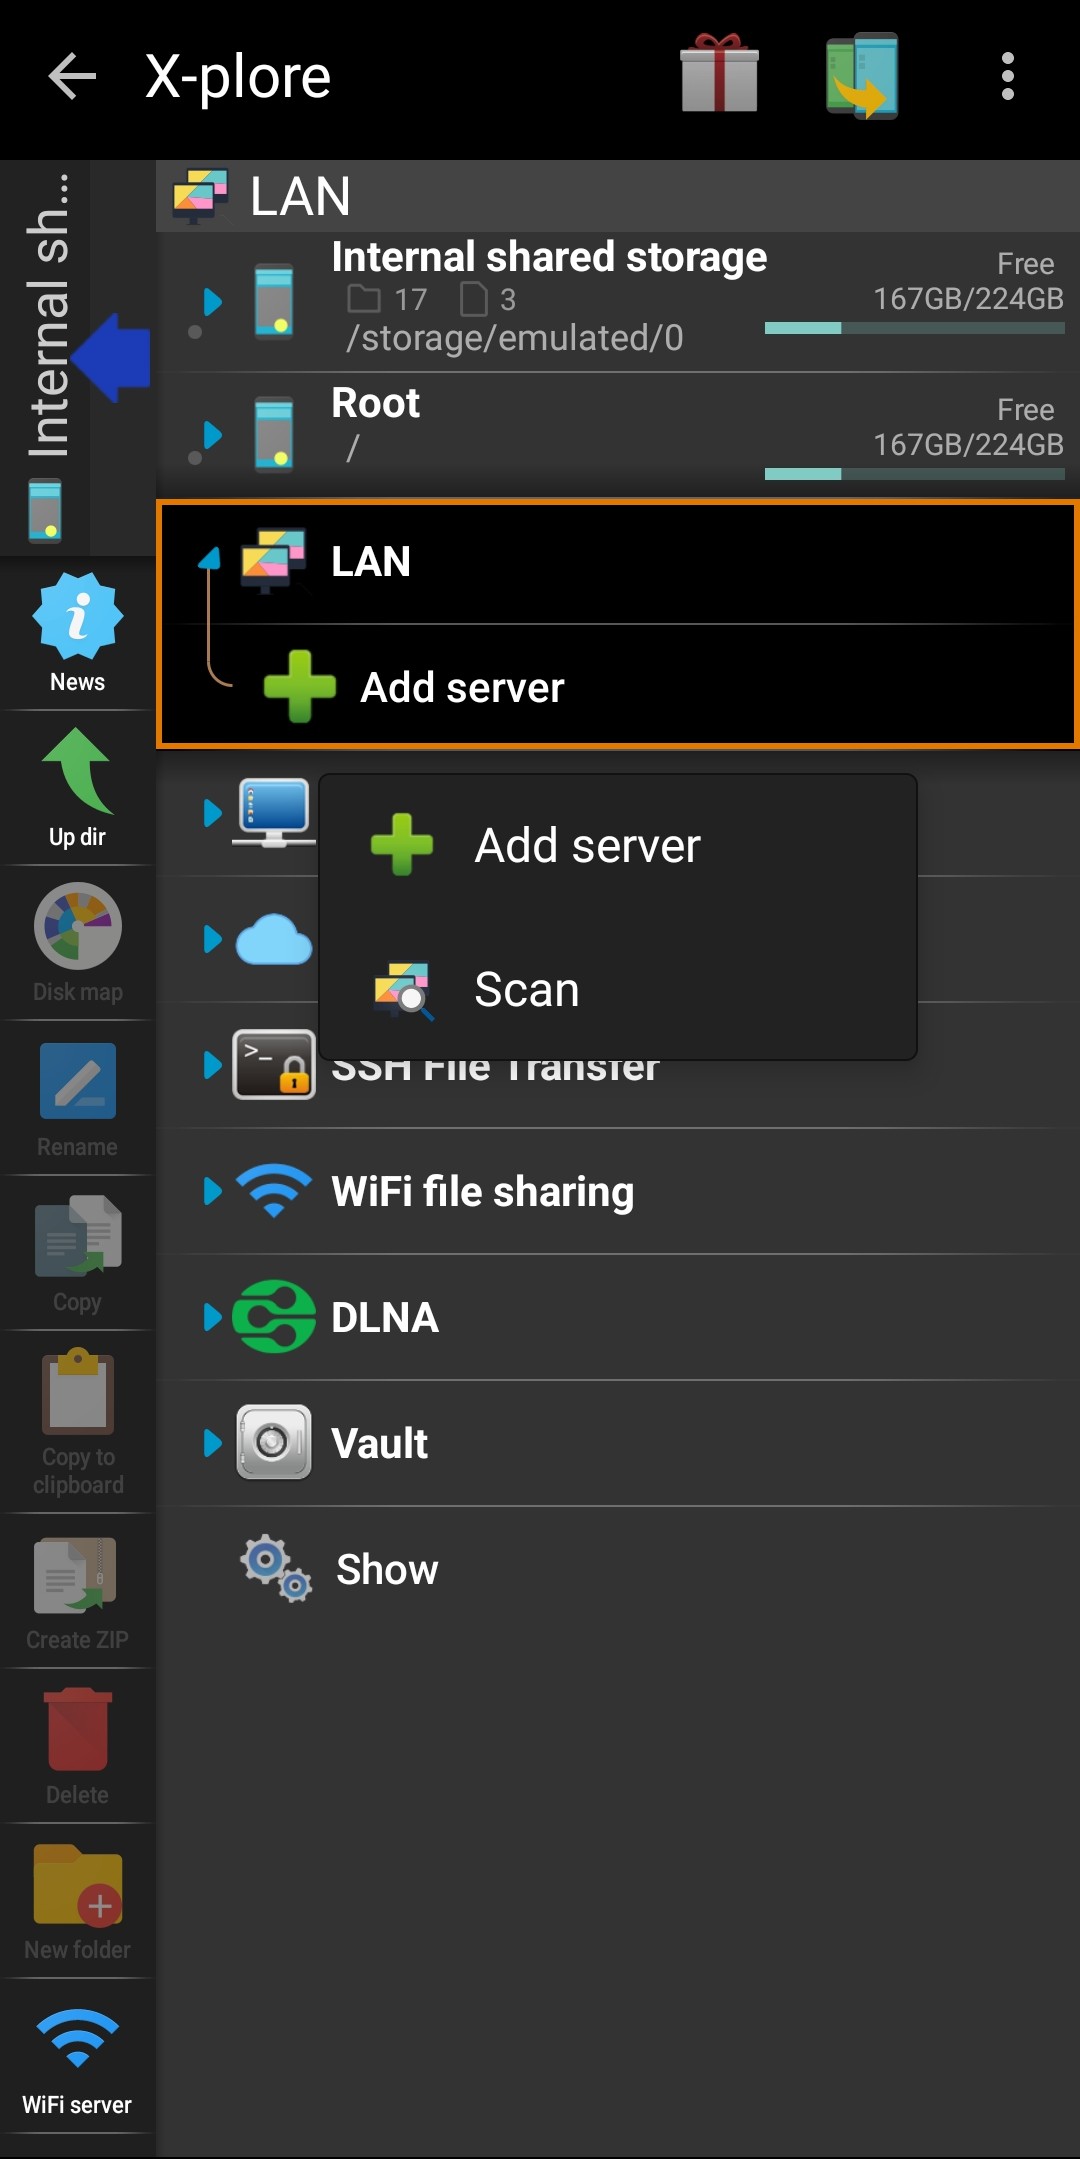 Discovered network shares in X-plore File Manager.